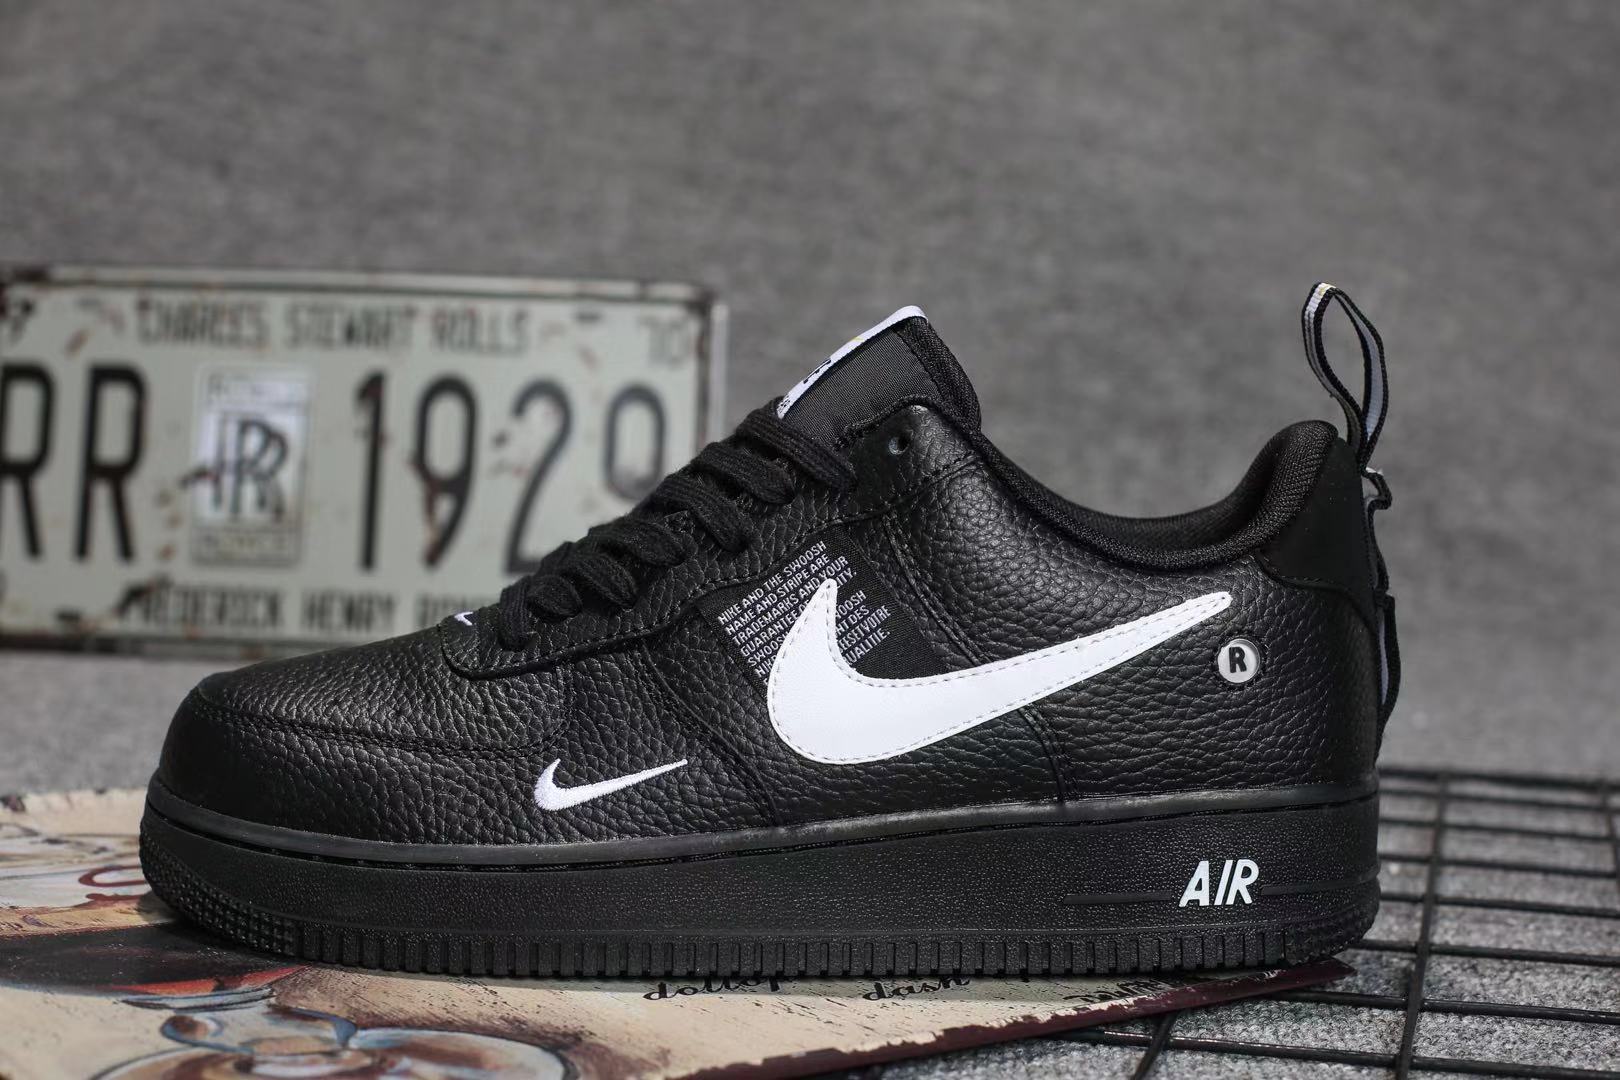 Nike Air Force 1 '07 LV8 Utility Black White Shoes - Click Image to Close